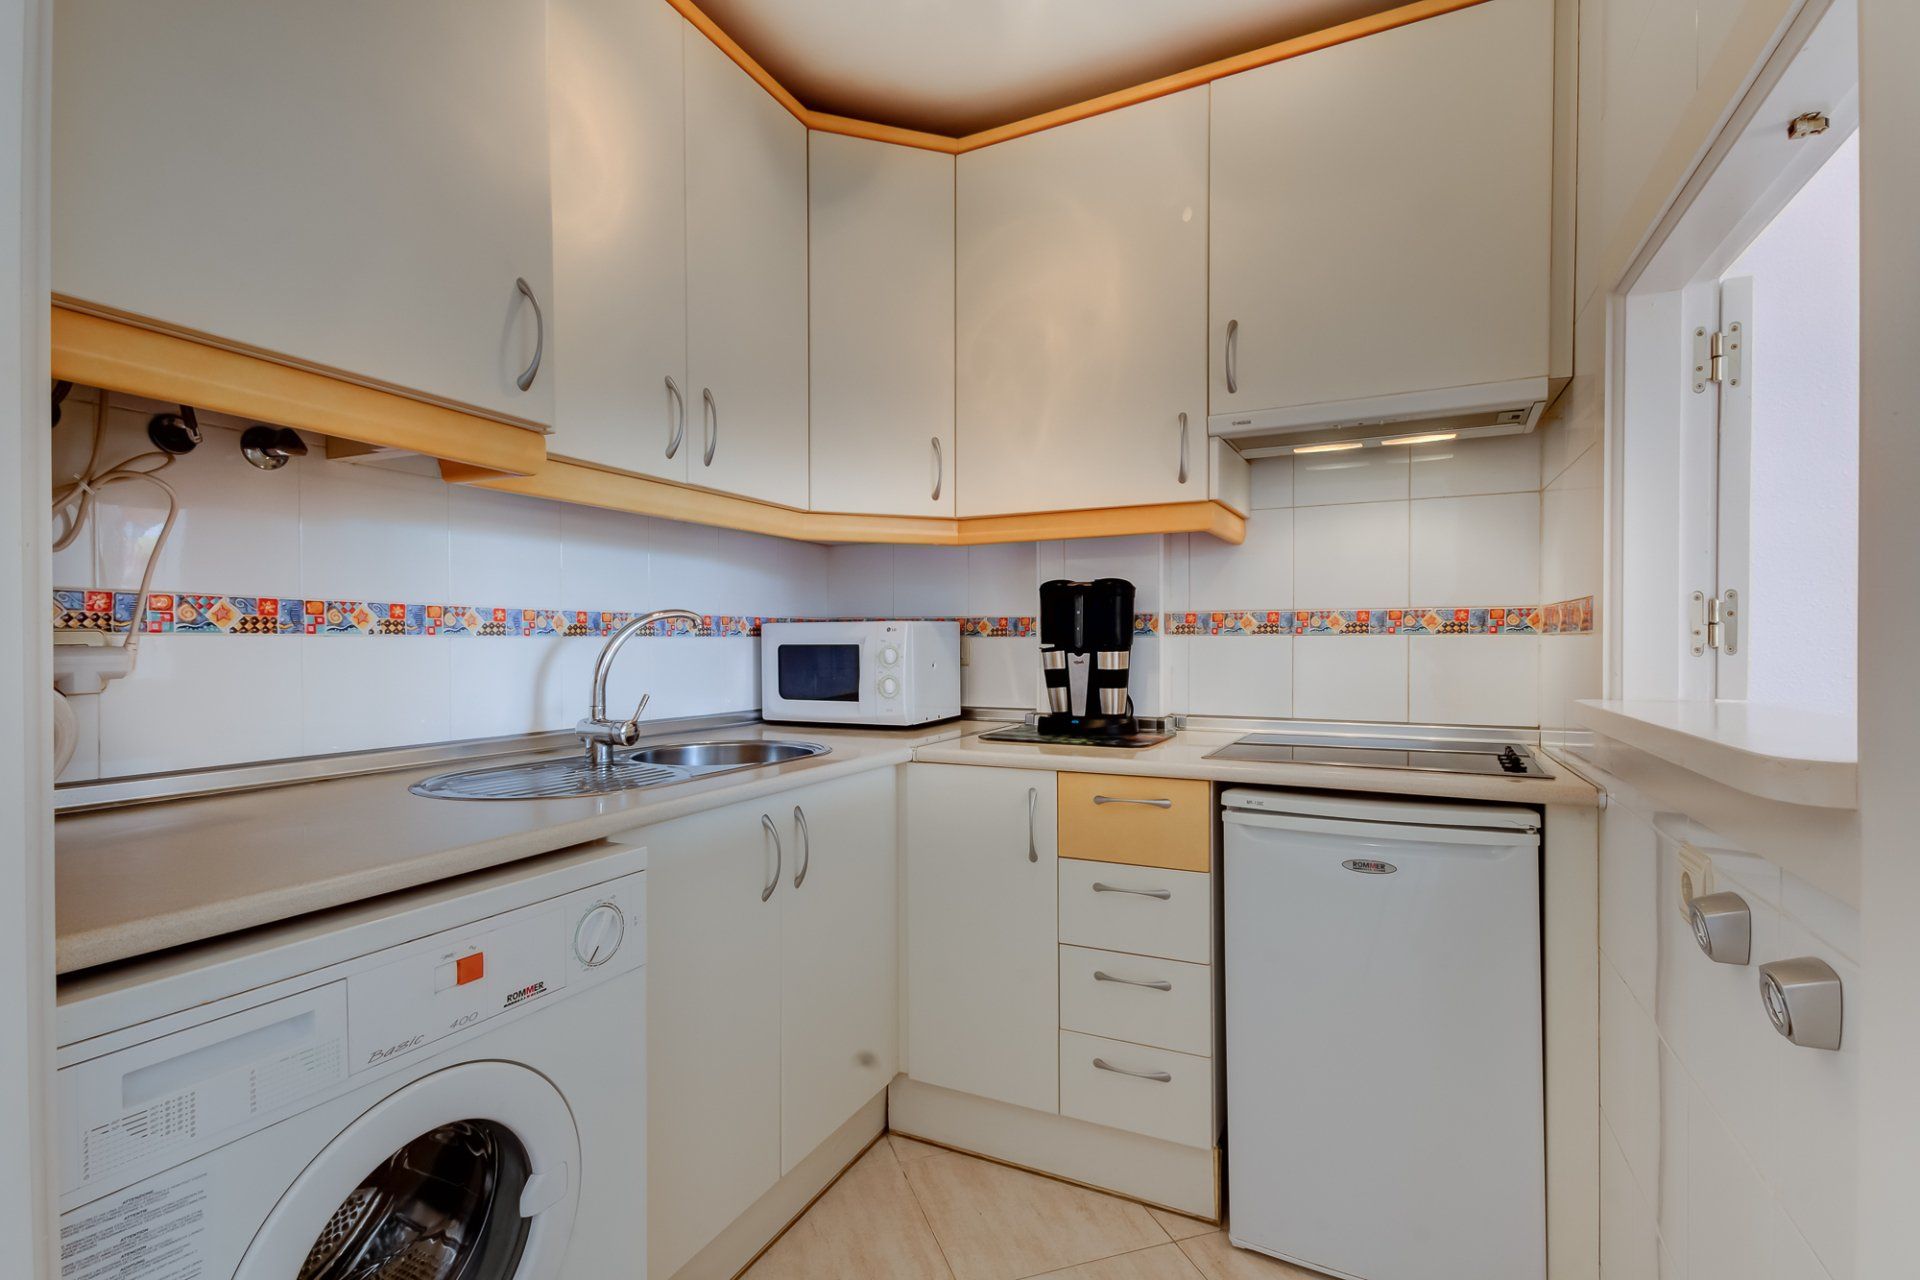 kitchen with white units and yellow trim and a serving hatch to the right